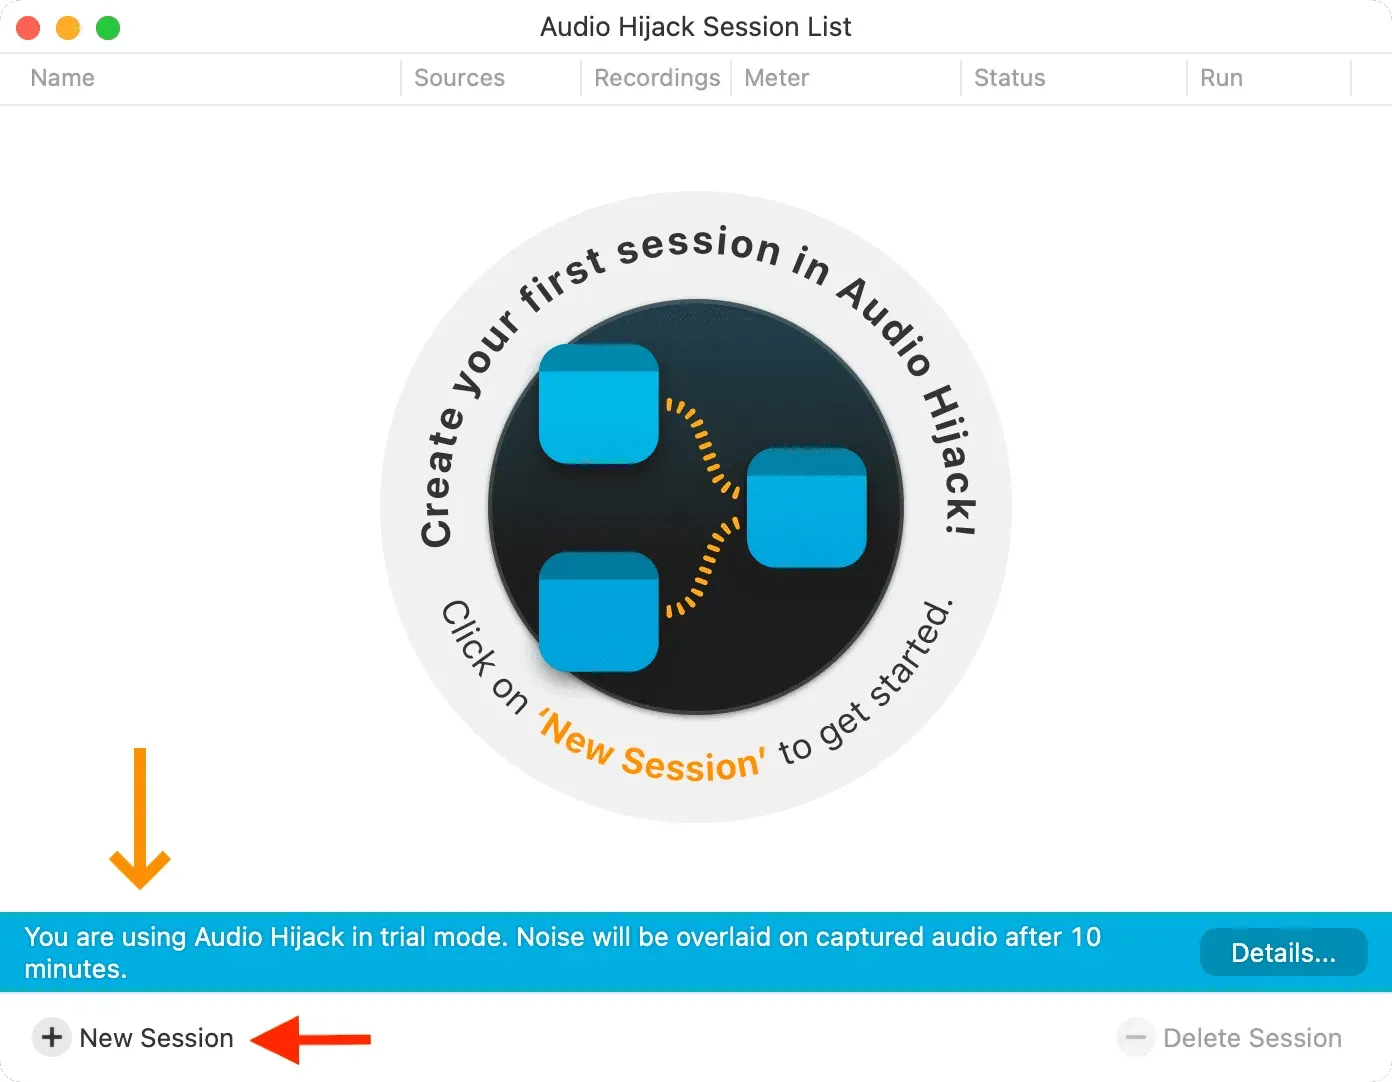 Click New Session in Audio Hijack